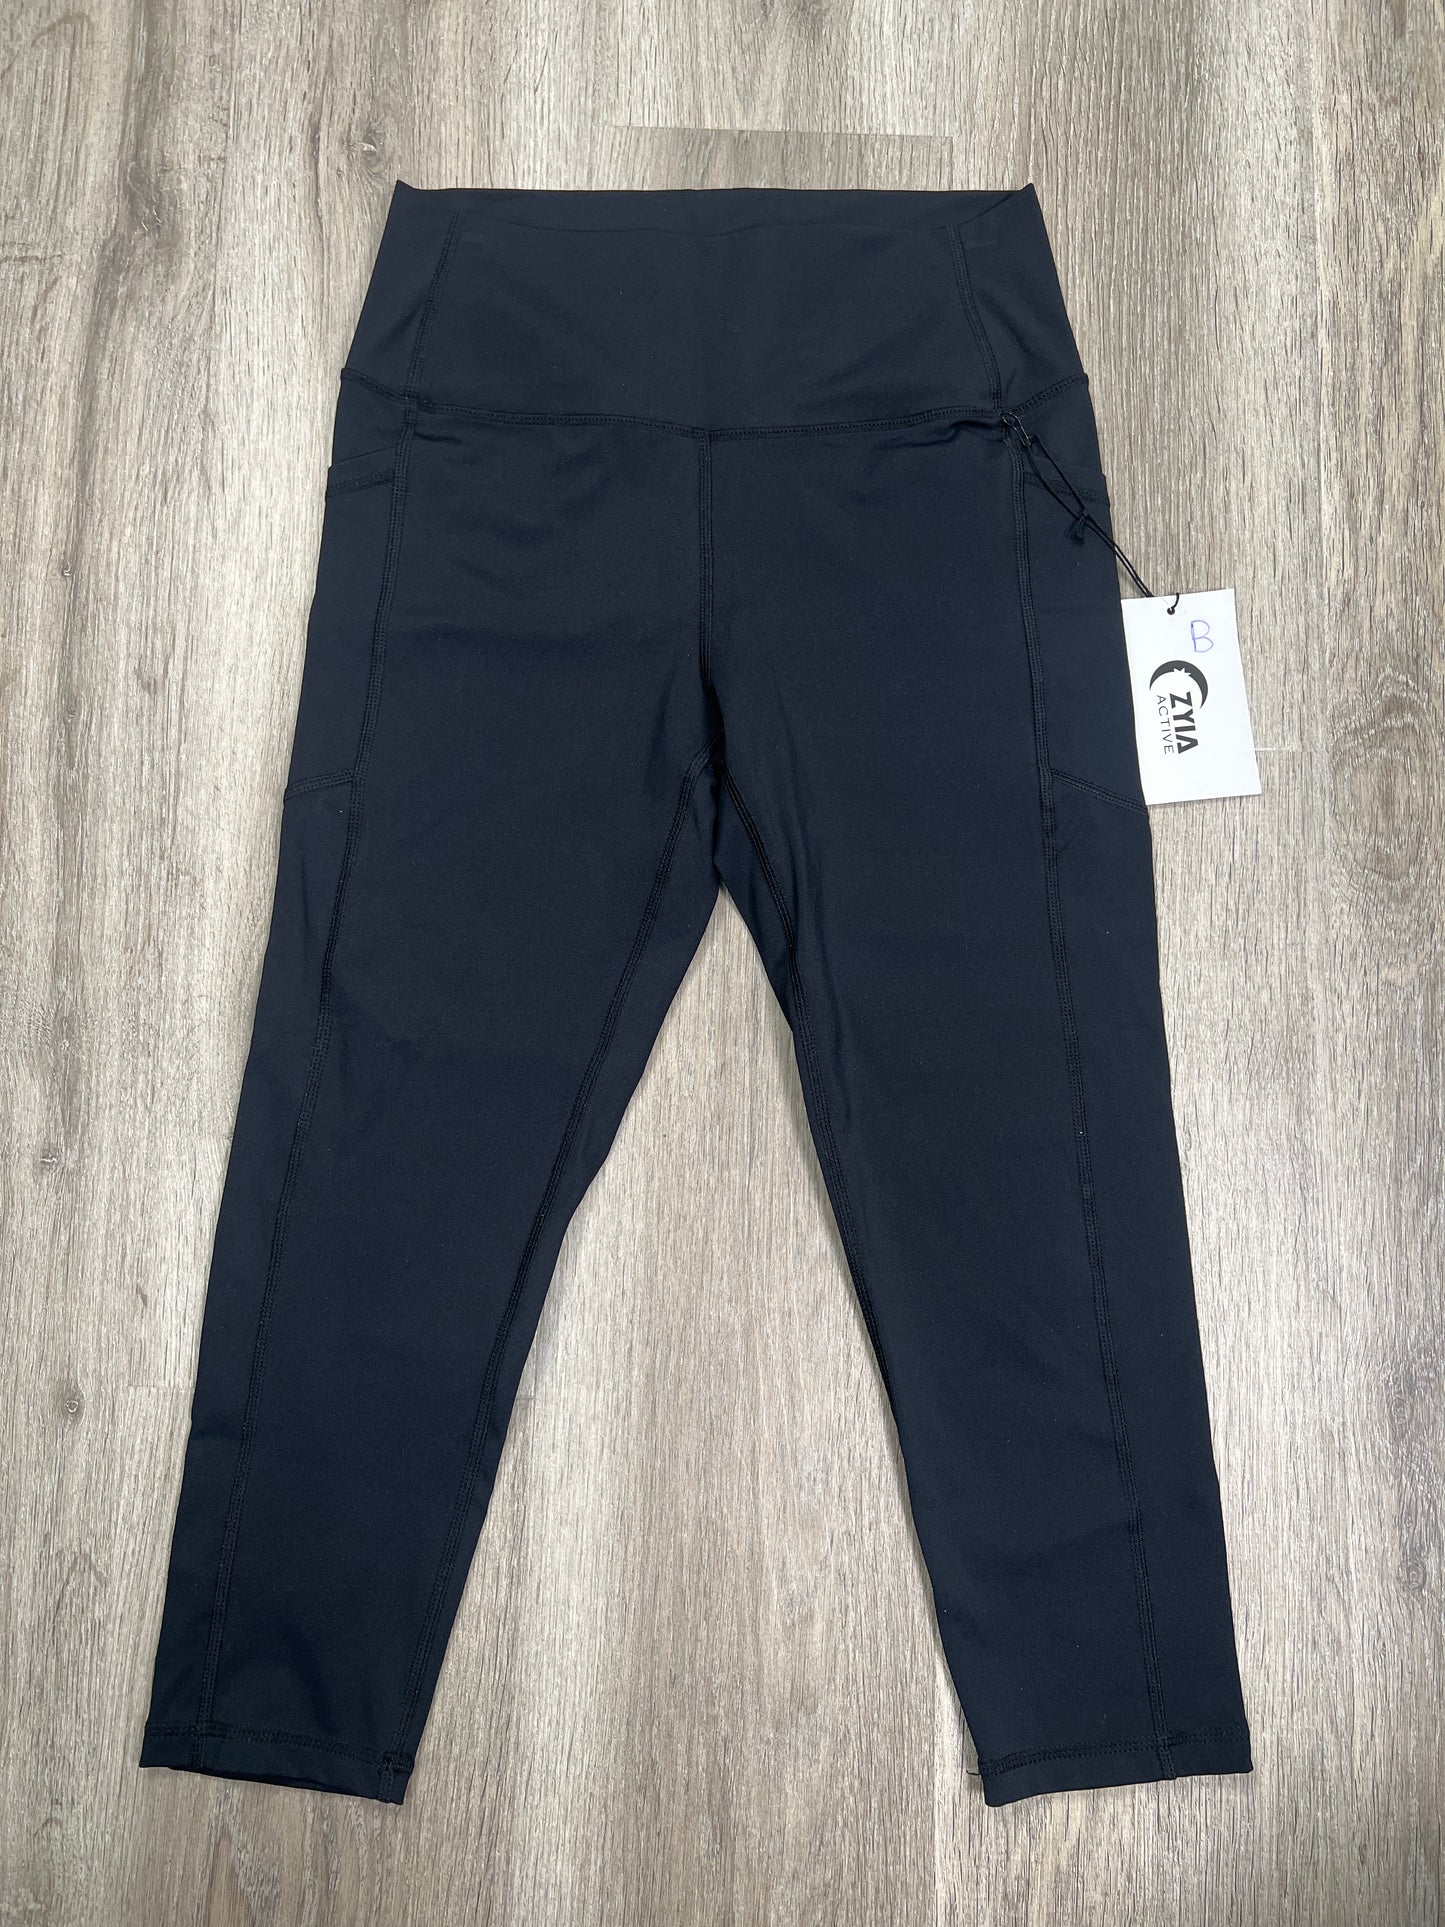 Athletic Capris By Zyia  Size: M